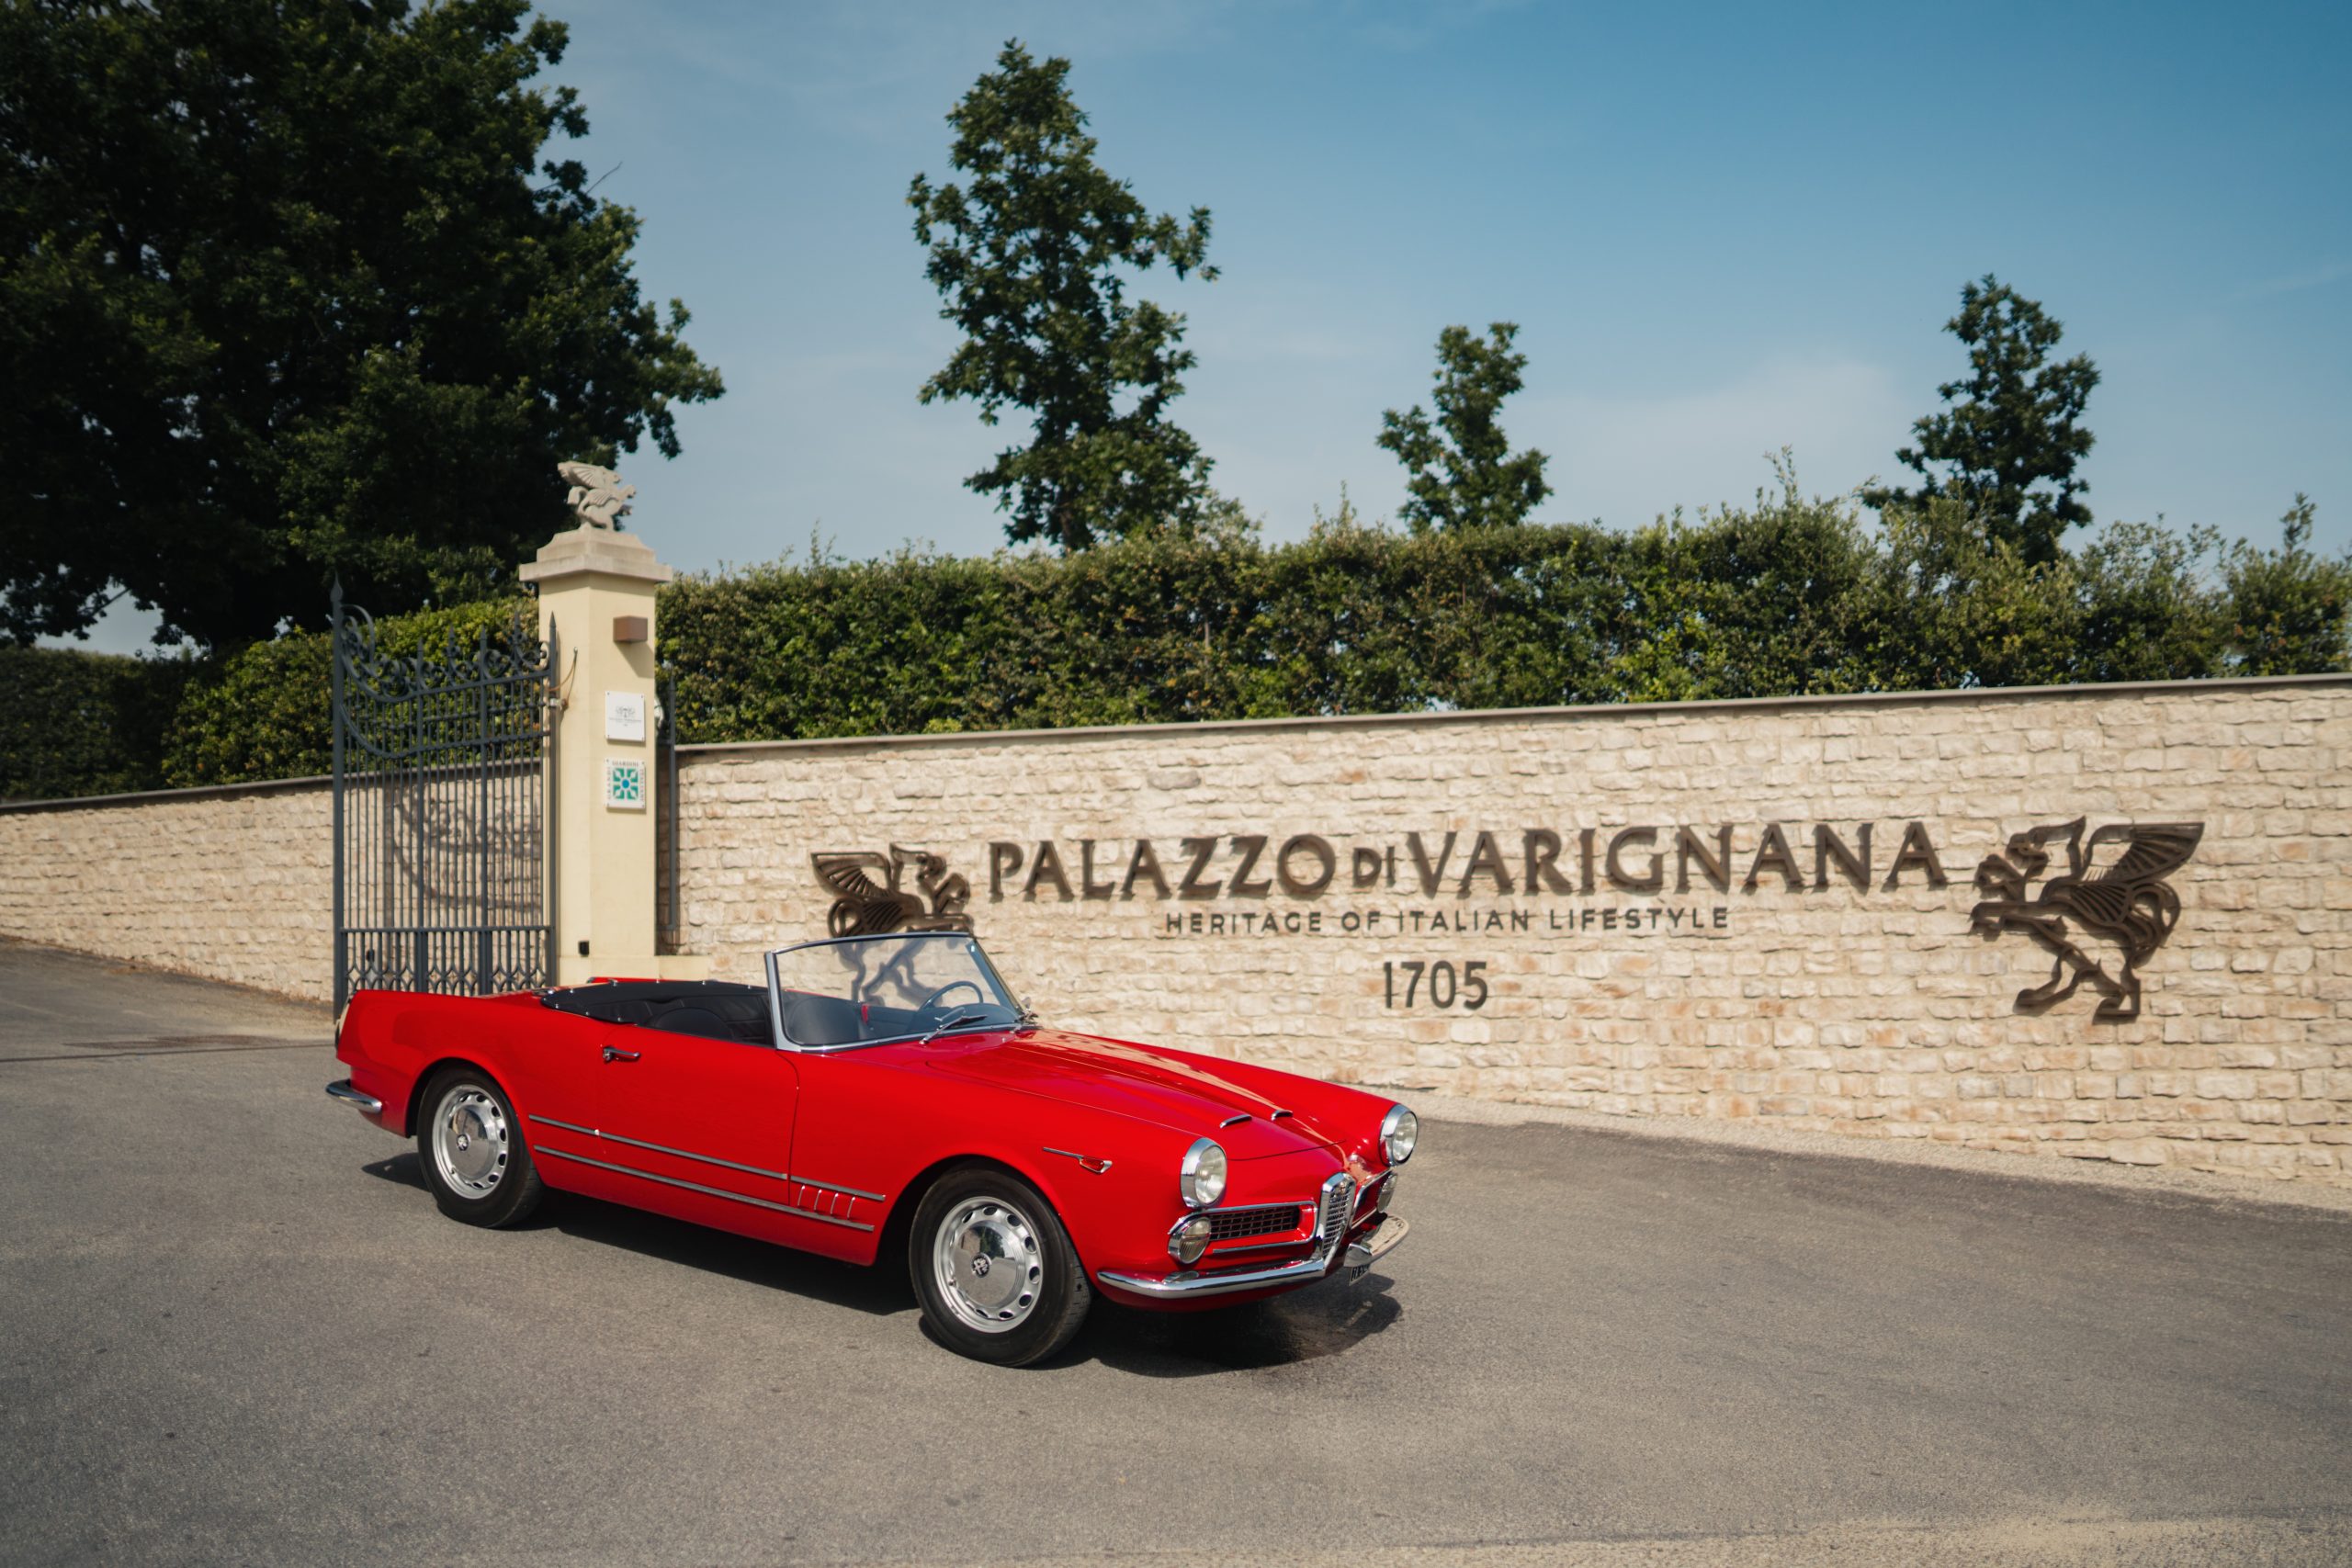 Italy's Motor Valley is hosting the world's most exclusive concours